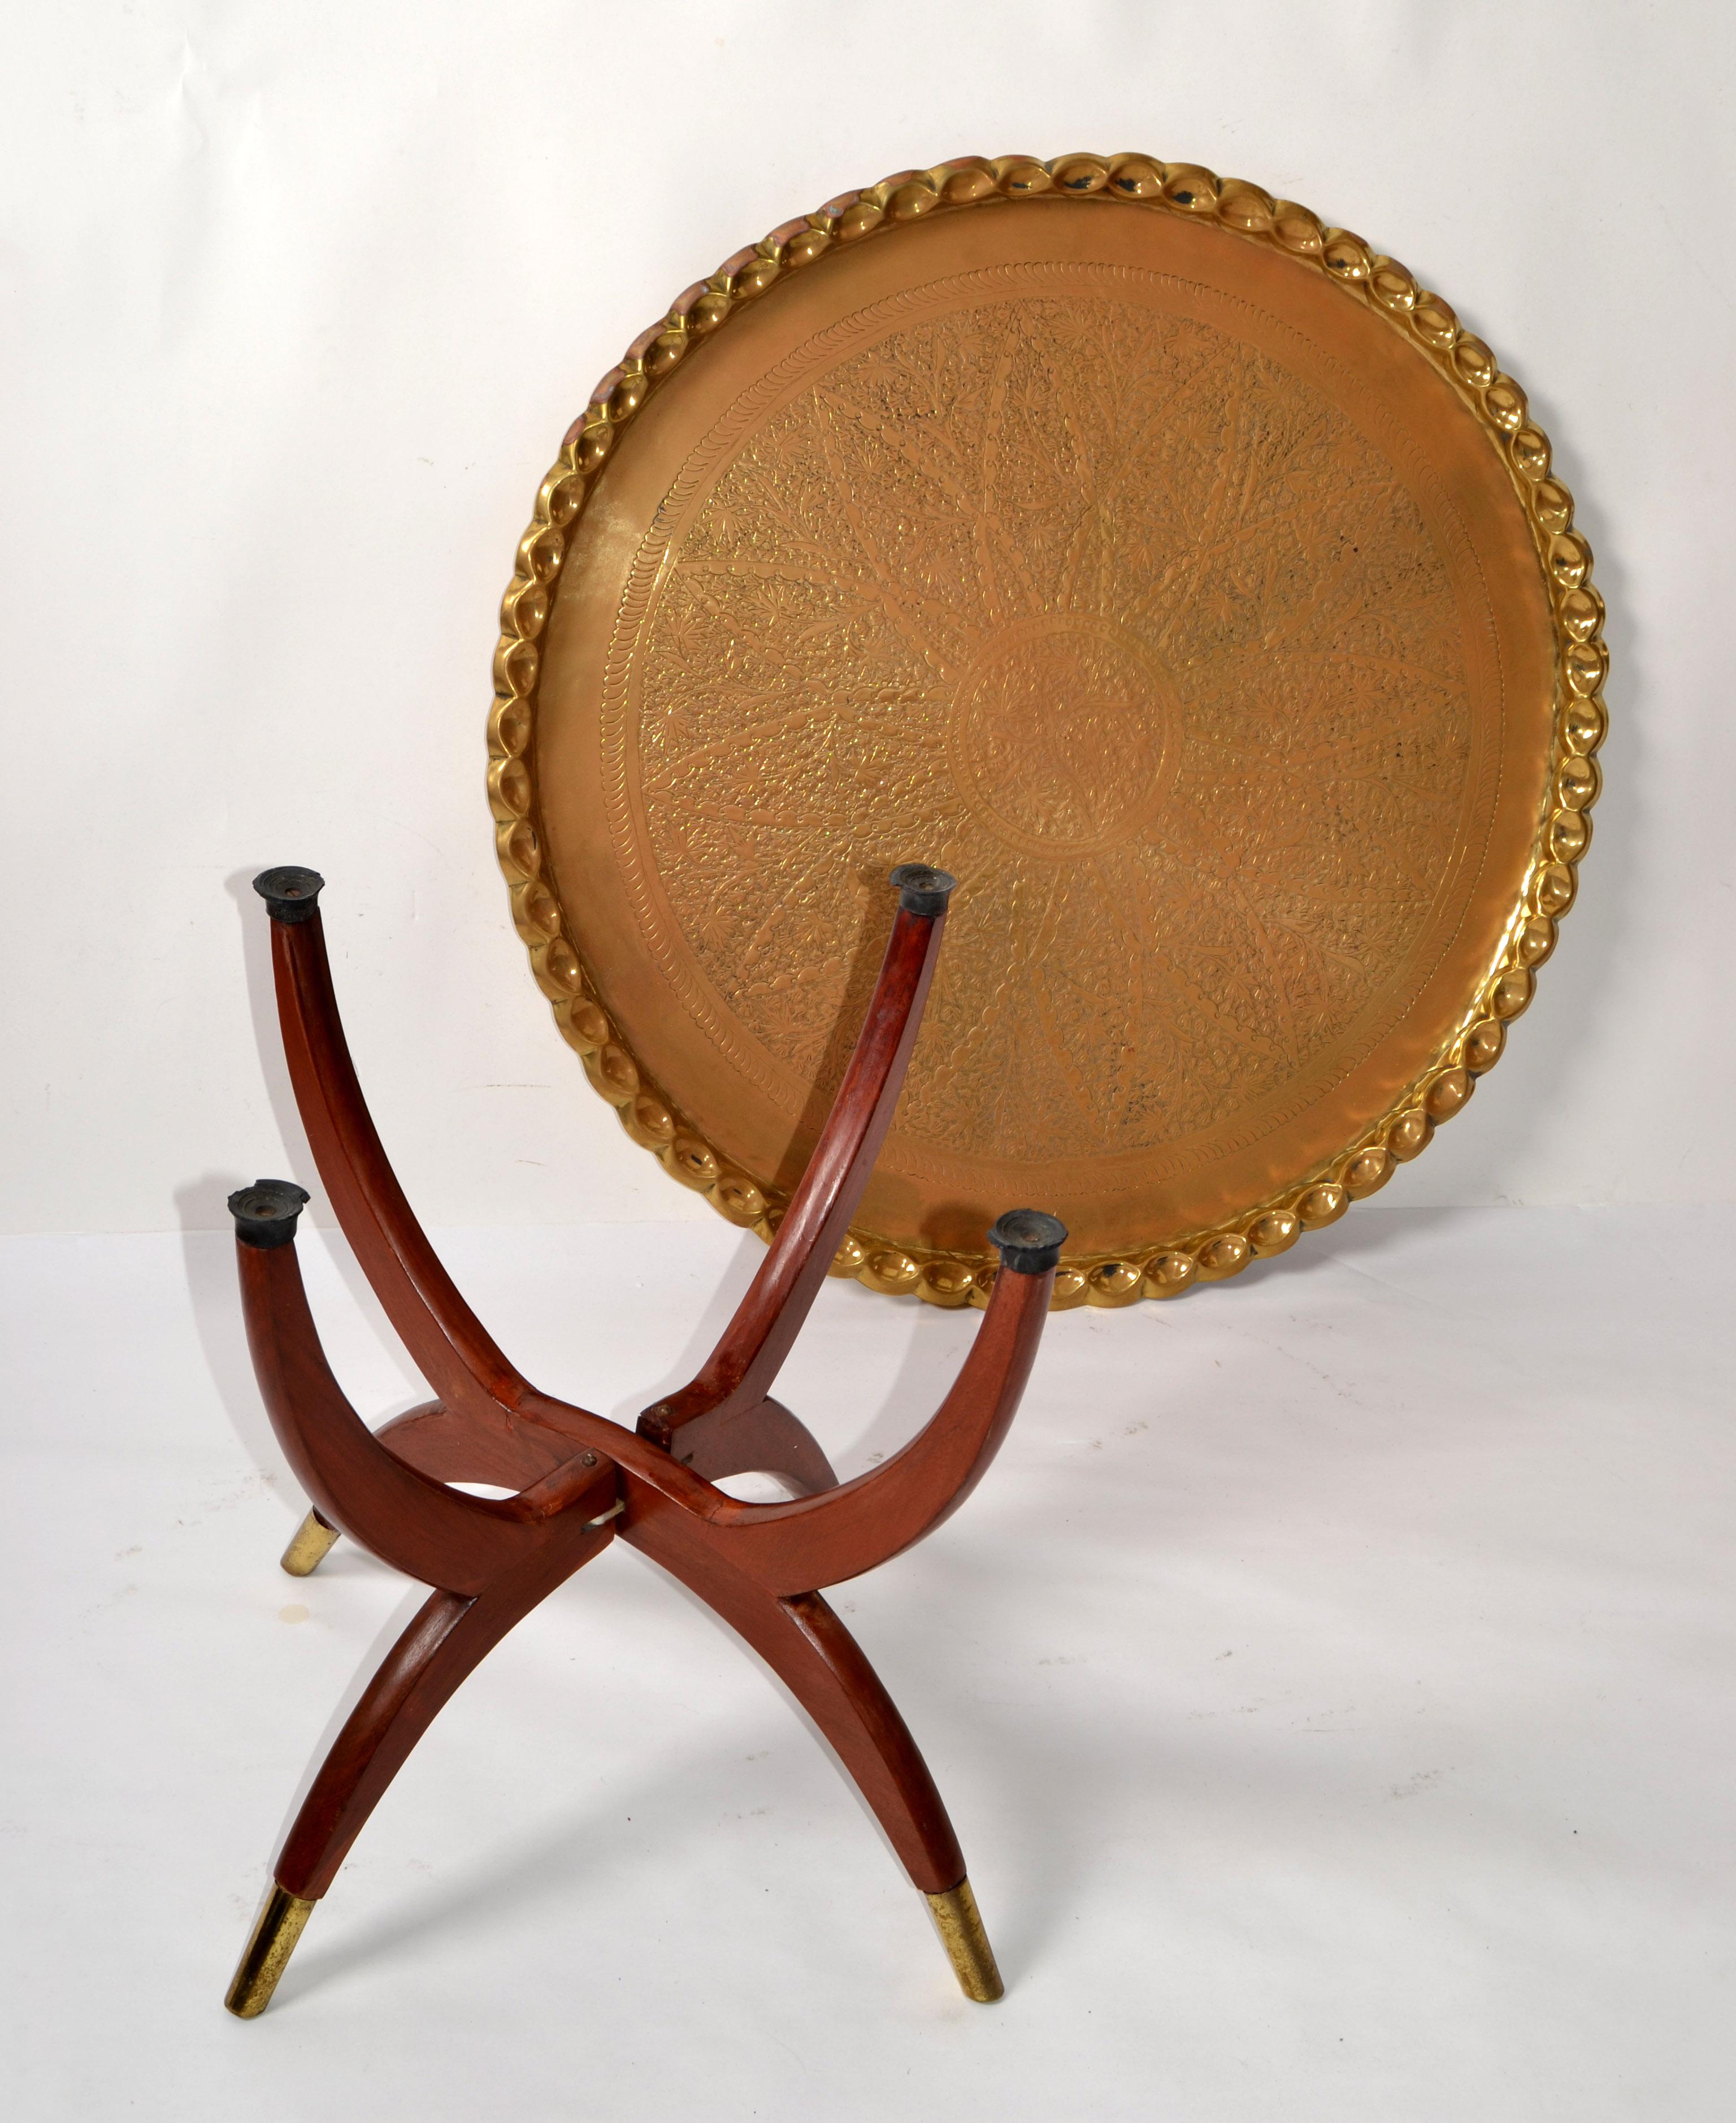 Oriental Vintage Round Walnut Spider Leg and Bronze Moroccan Tray Coffee Table In Good Condition For Sale In Miami, FL